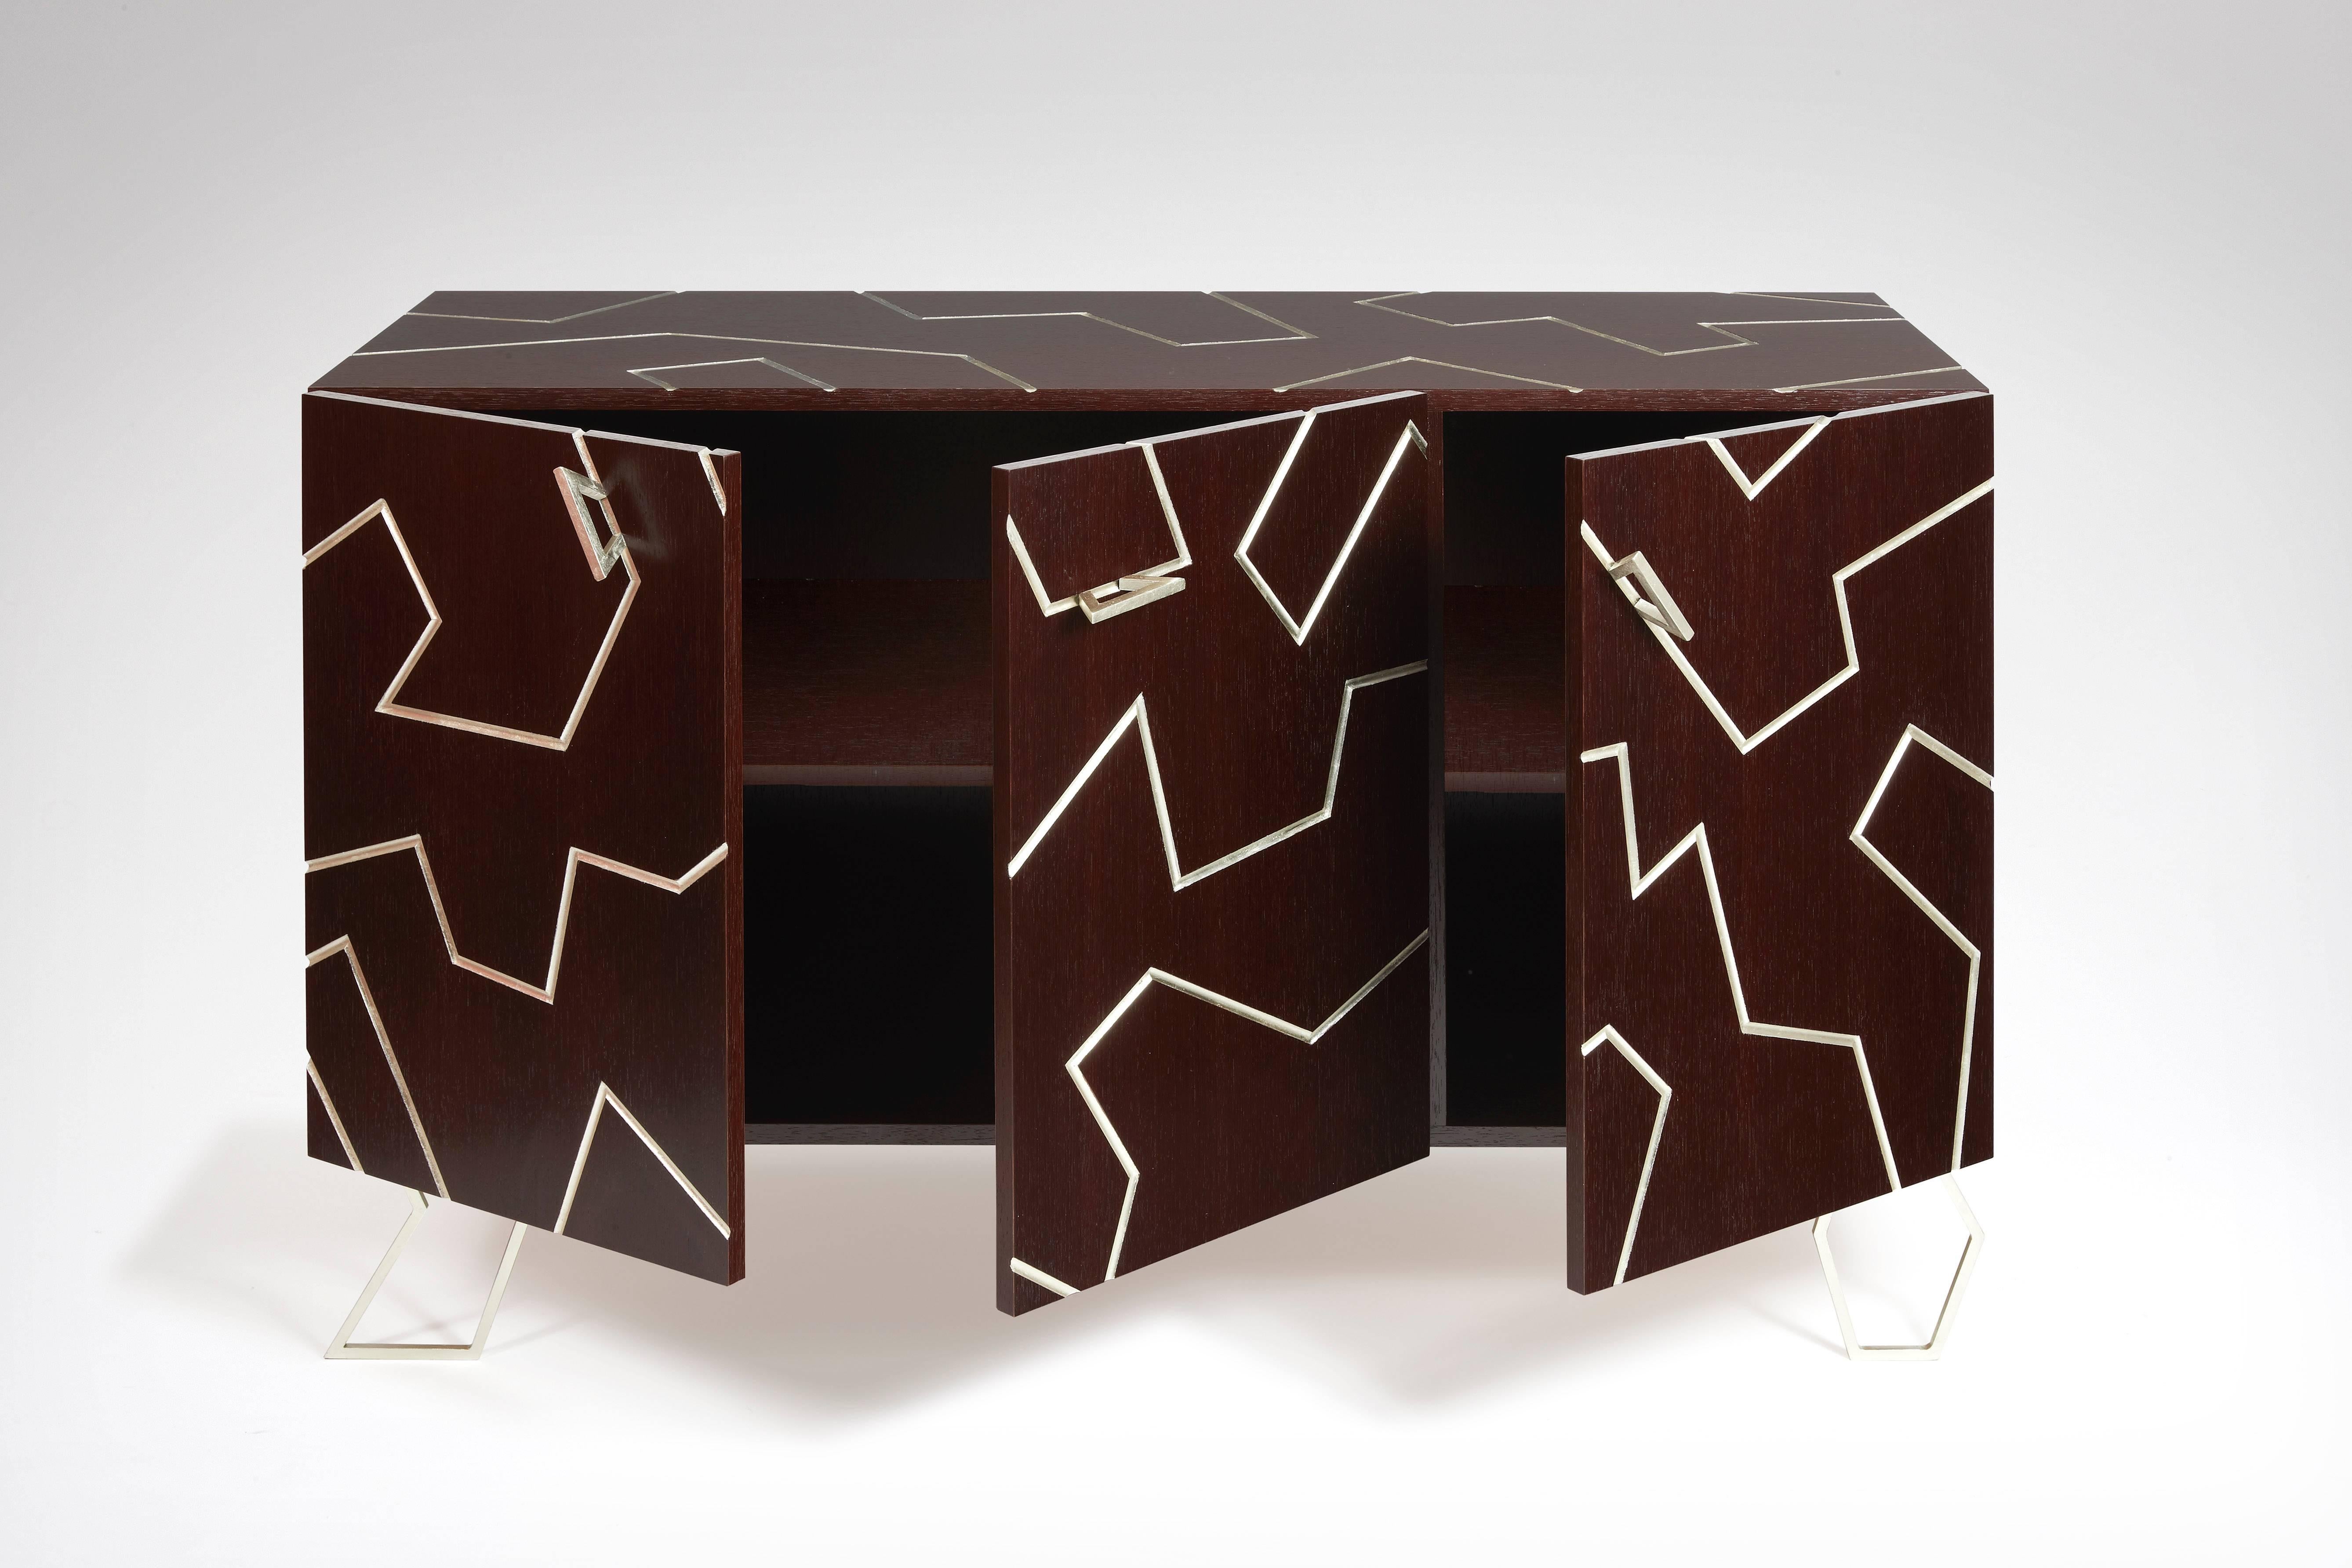 Zanzibar sideboard.
Cat-Berro edition 1998. 
Three doors. Wenge wood. White gold leaves.
Measures: H 90 cm. L 140 cm. D 50 cm.
Signed piece.

Delivery time: 10 to 12 weeks.
Pricing does not include sales tax (French VAT) if applicable.
 